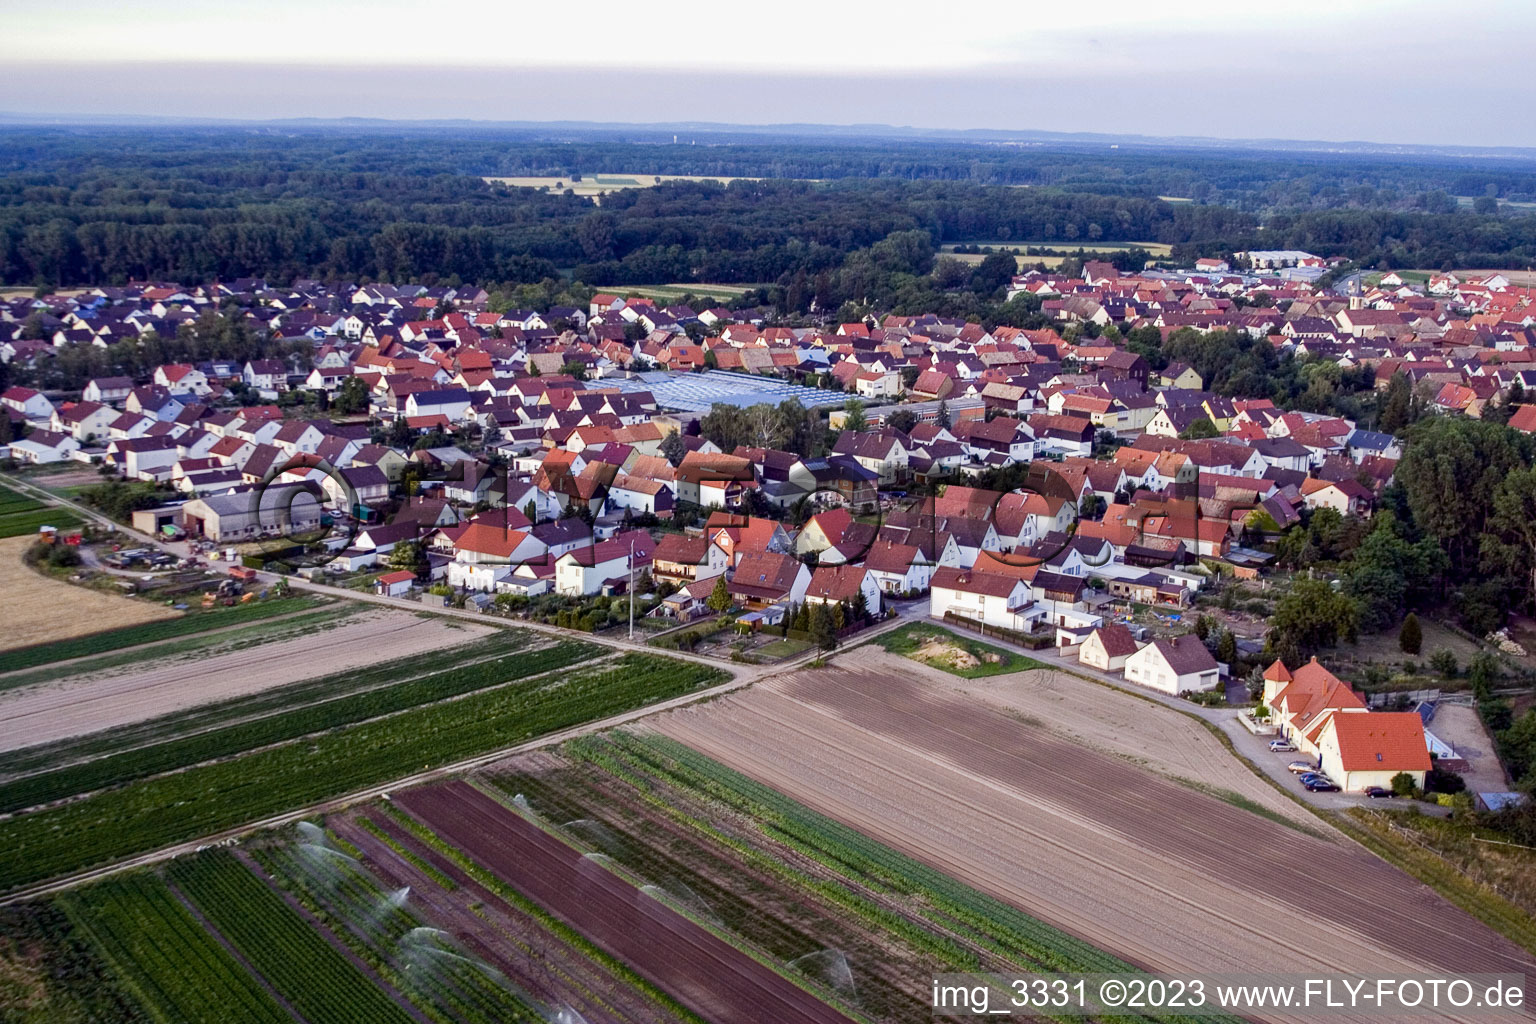 Drone recording of Kuhard in Kuhardt in the state Rhineland-Palatinate, Germany